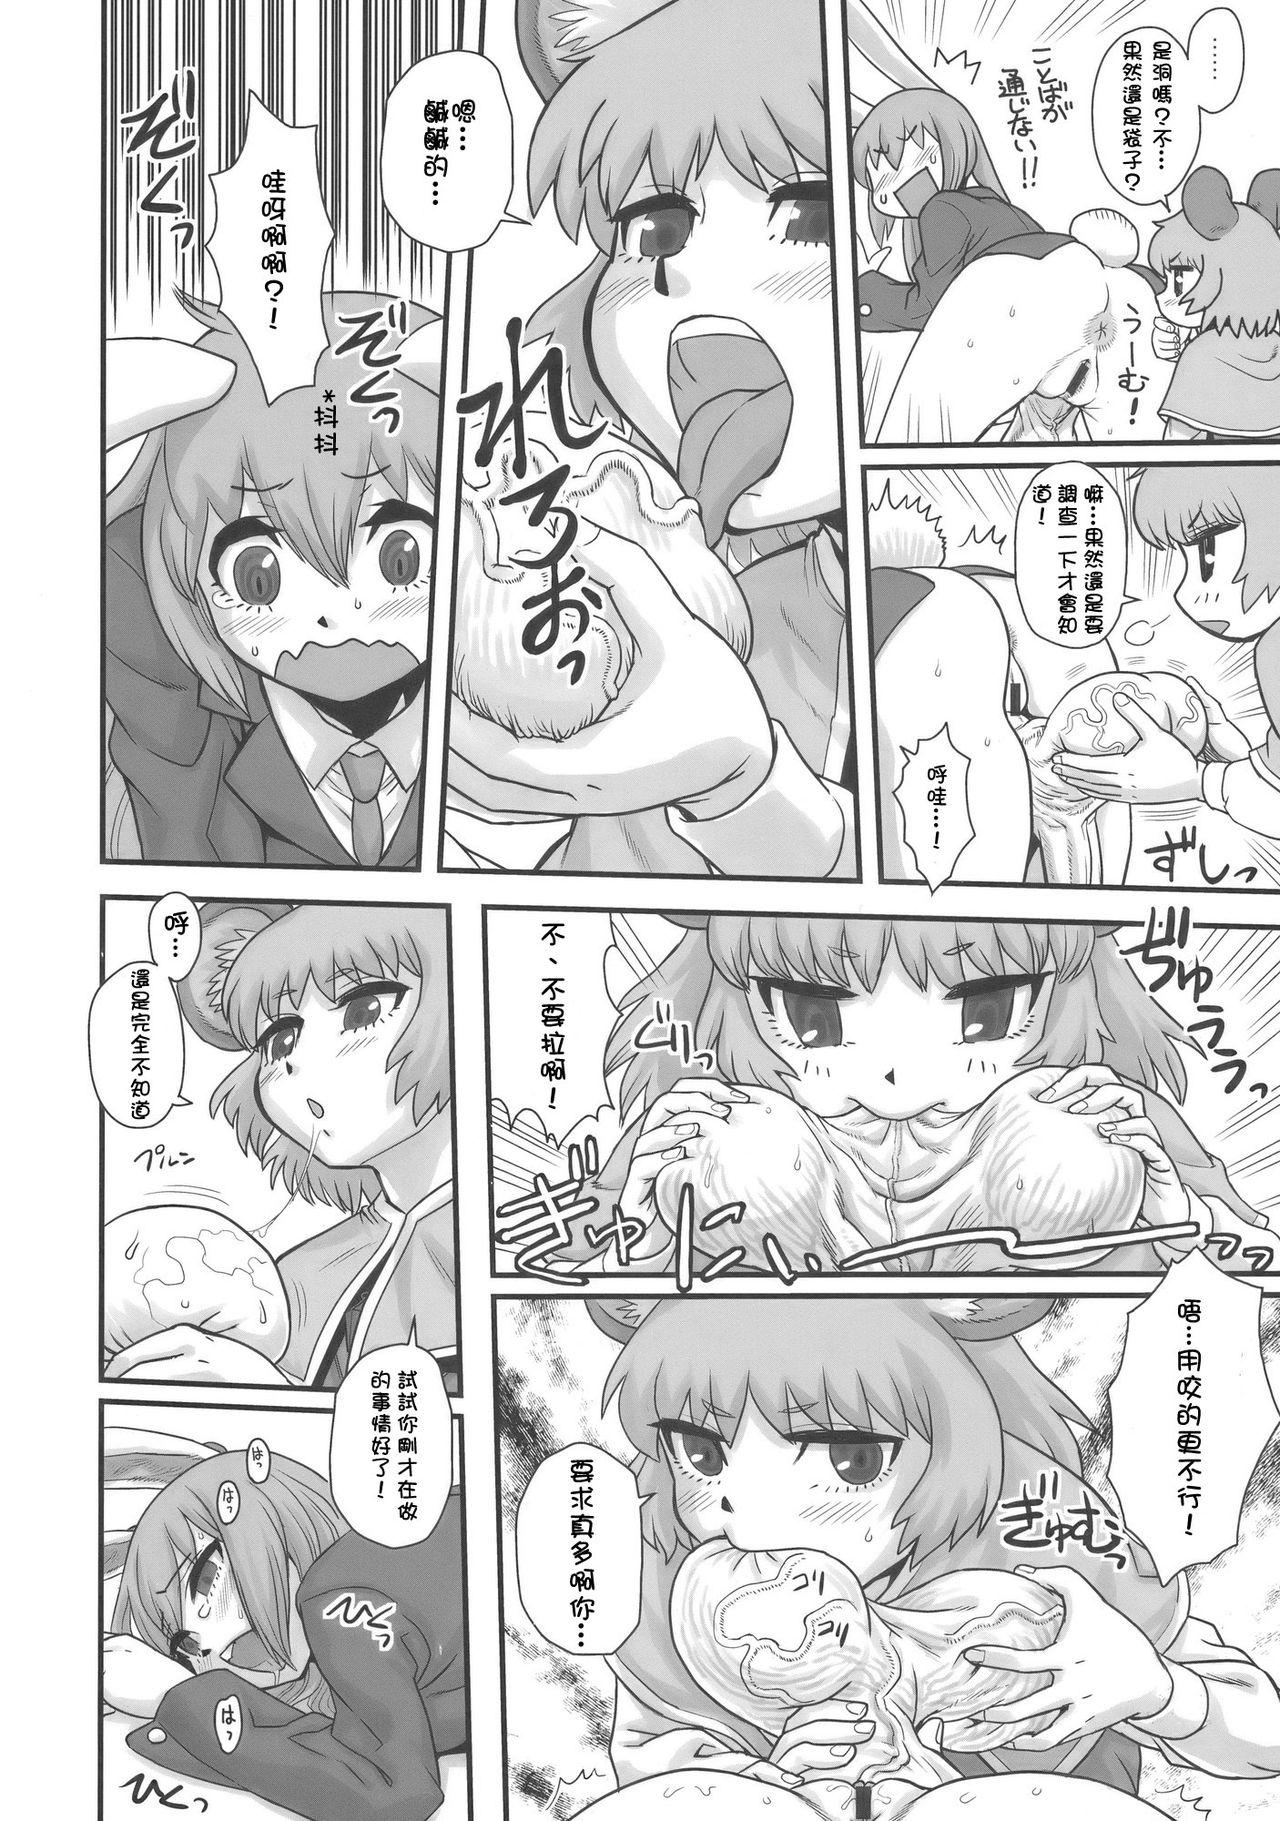 Orgasmo Lunatic Udon - Touhou project Sapphic Erotica - Page 8